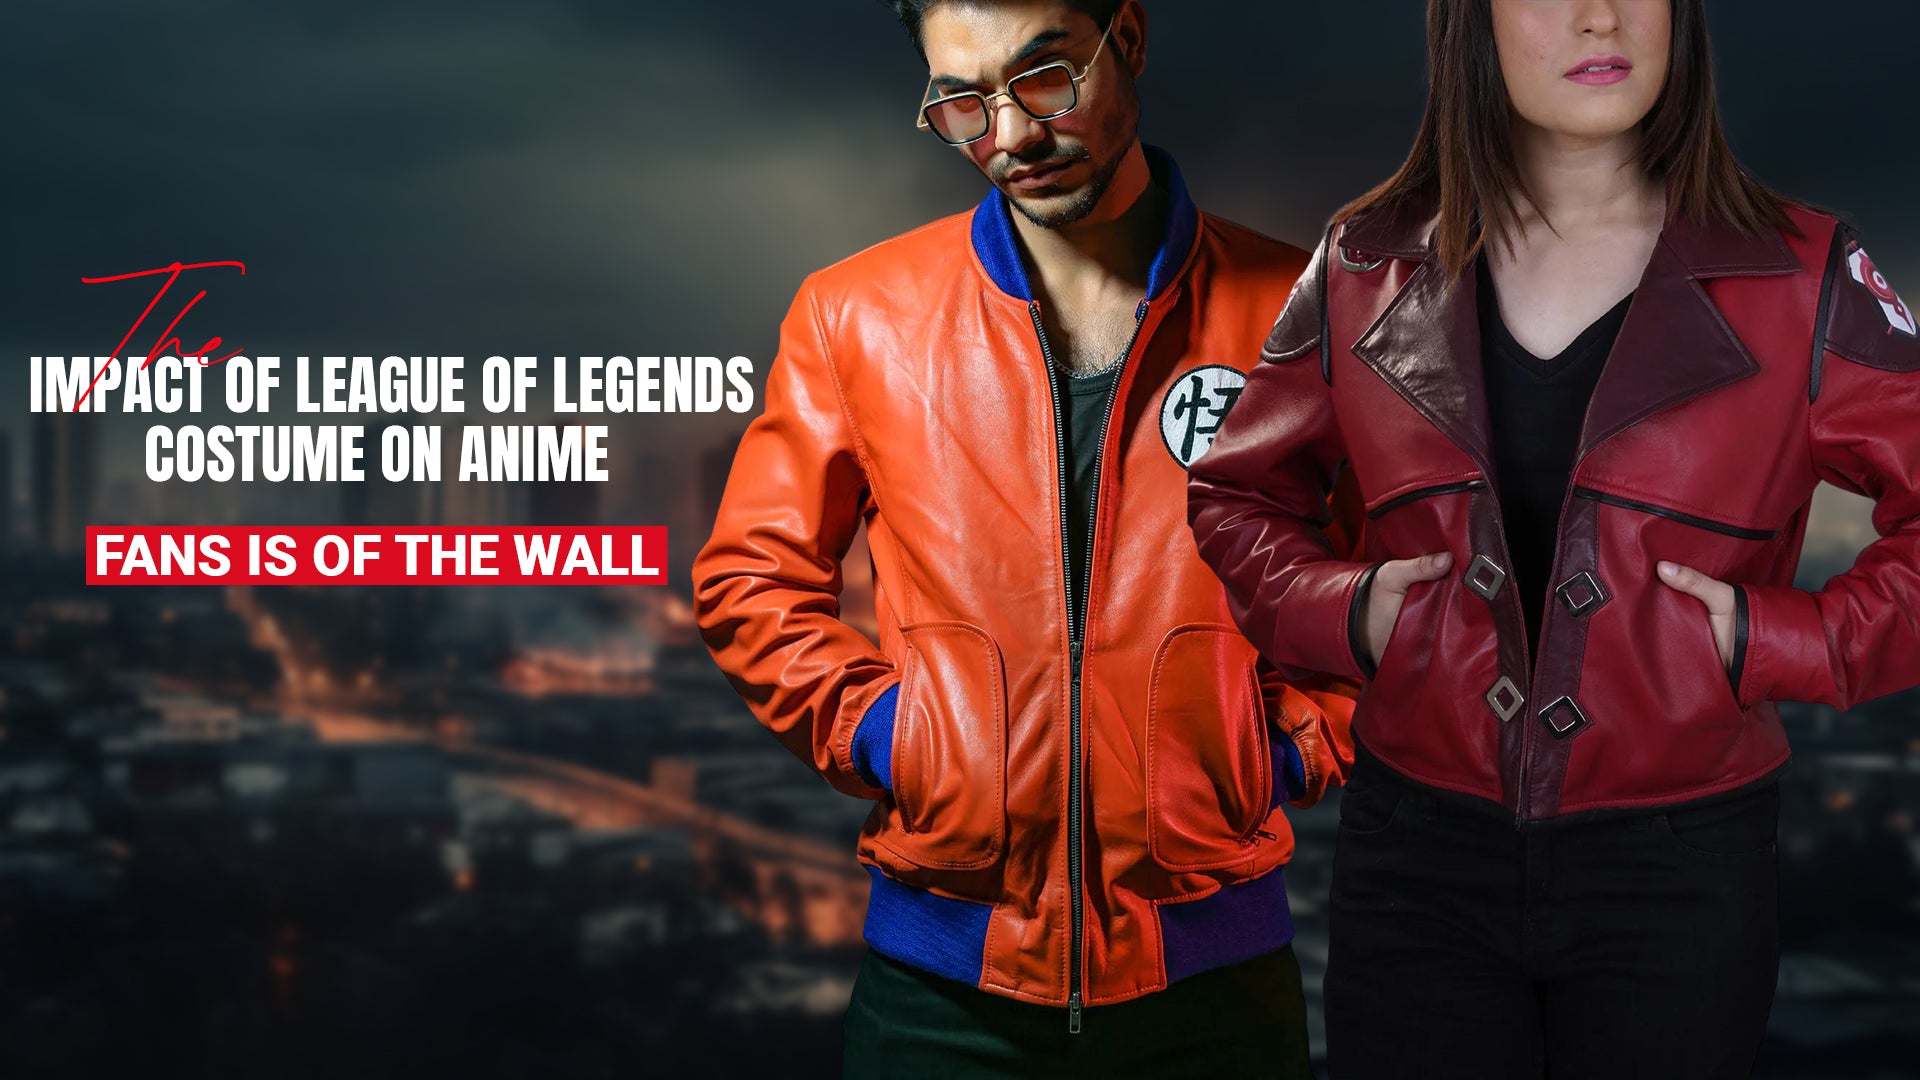 The Impact Of League Of Legends Costume On Anime Fans Is Of The Wall